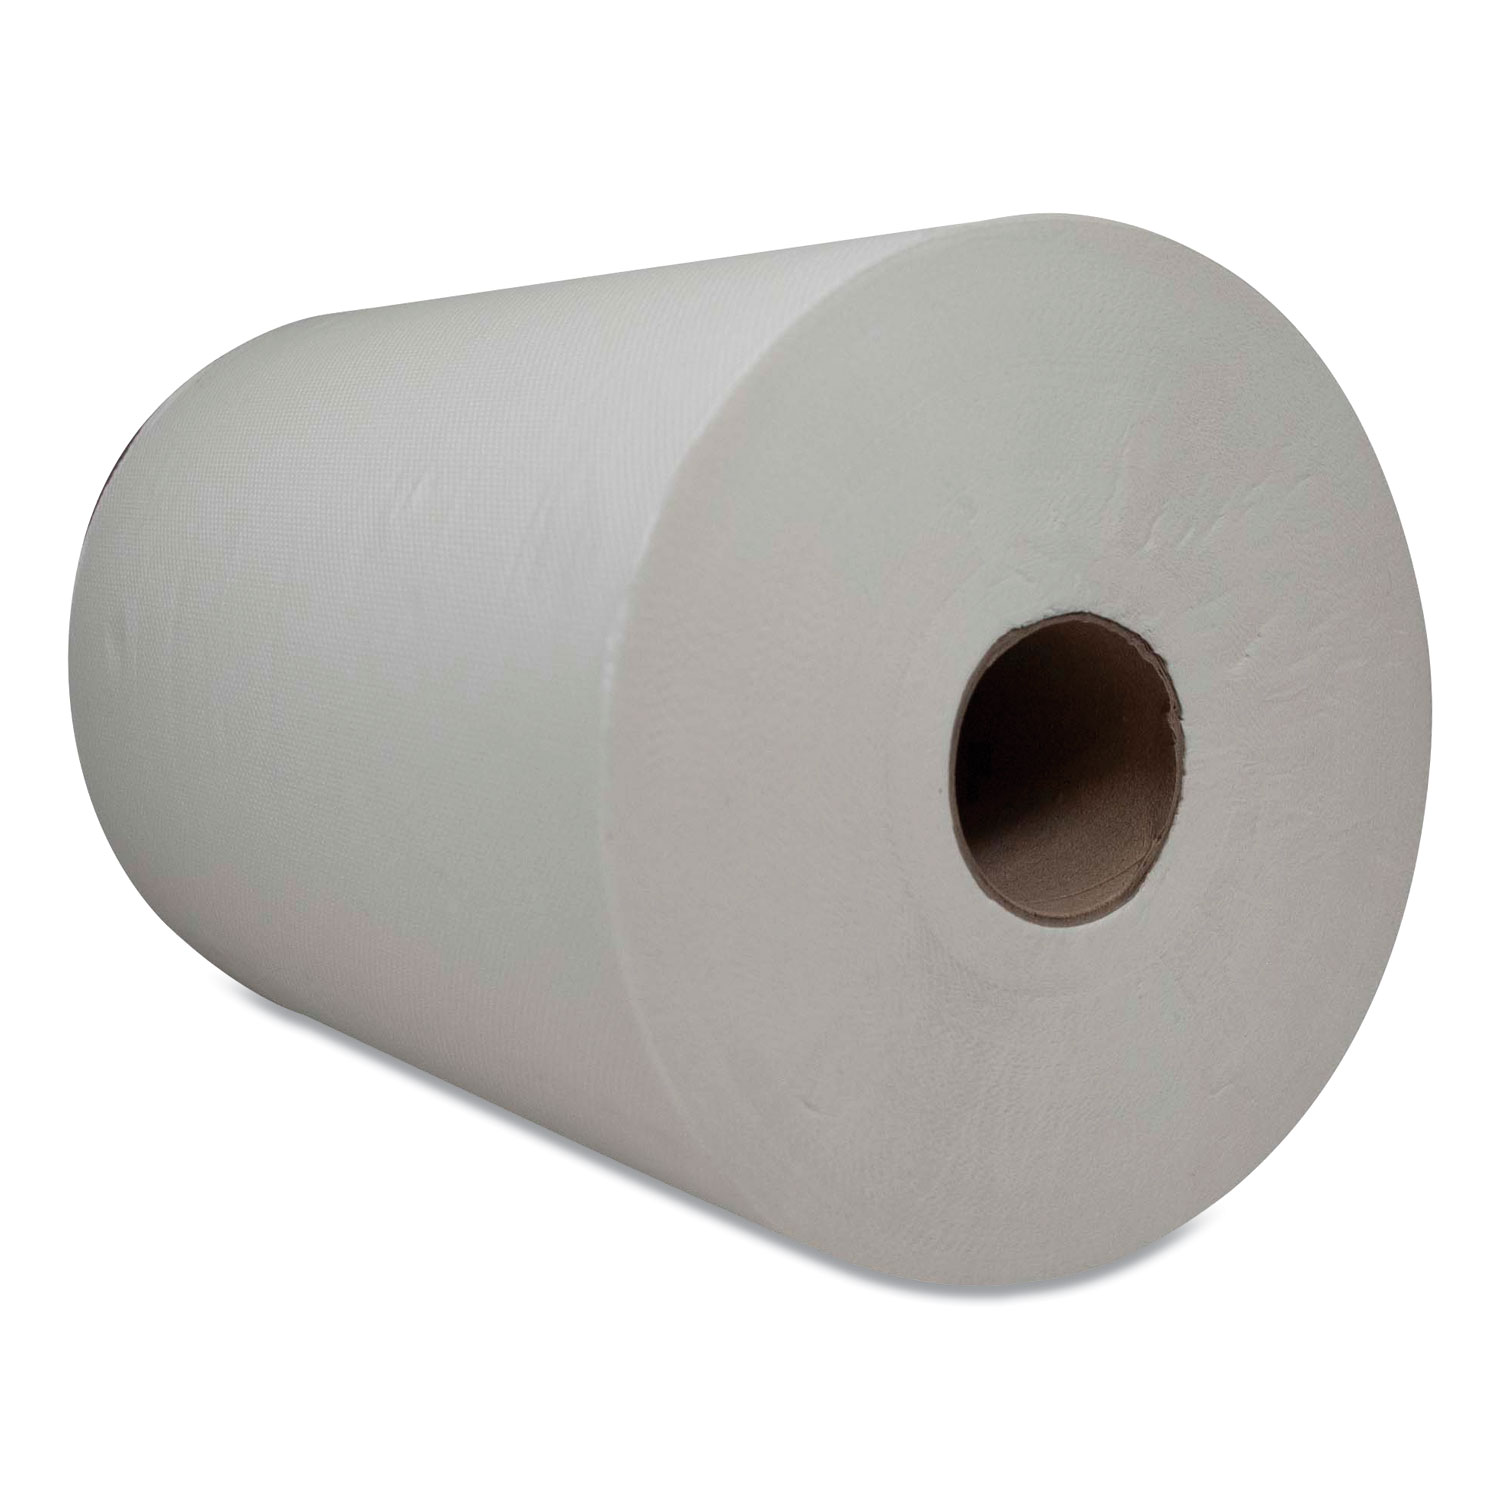  Morcon Tissue M610 10 Inch TAD Roll Towels, 1-Ply, 7.25 x 500 ft, White, 6 Rolls/Carton (MORM610) 